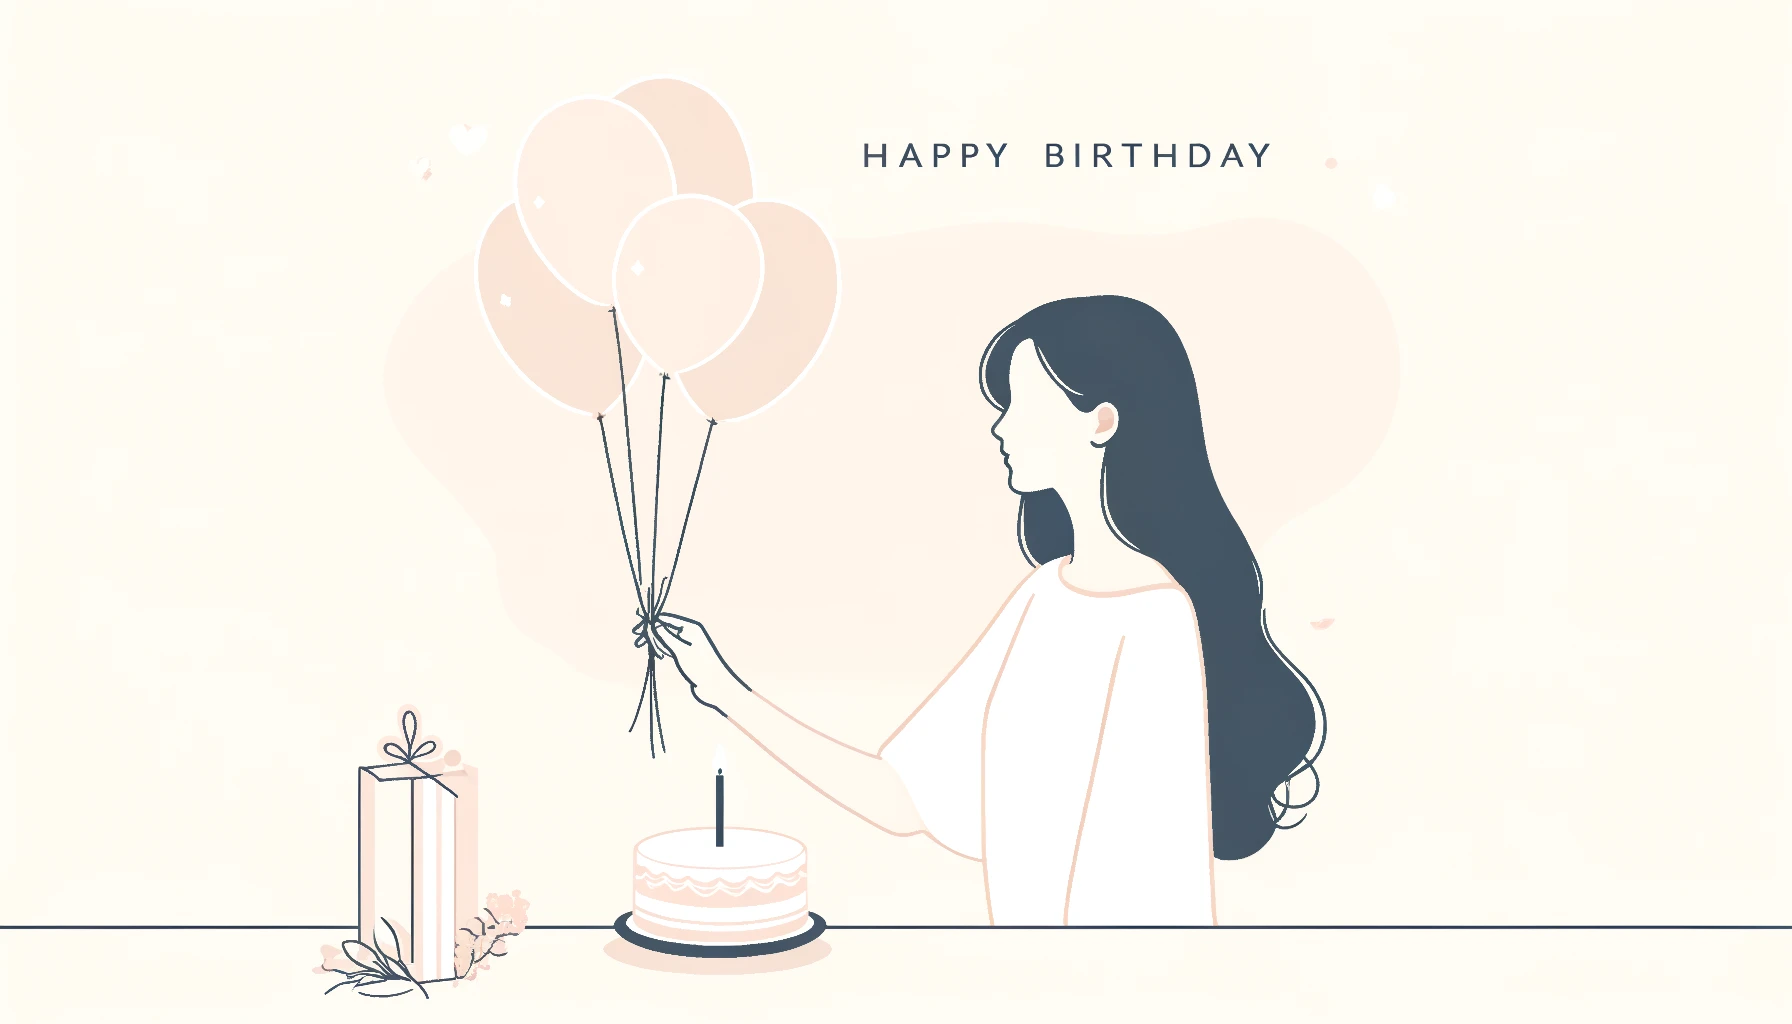 Birthday Wishes for a Young Woman